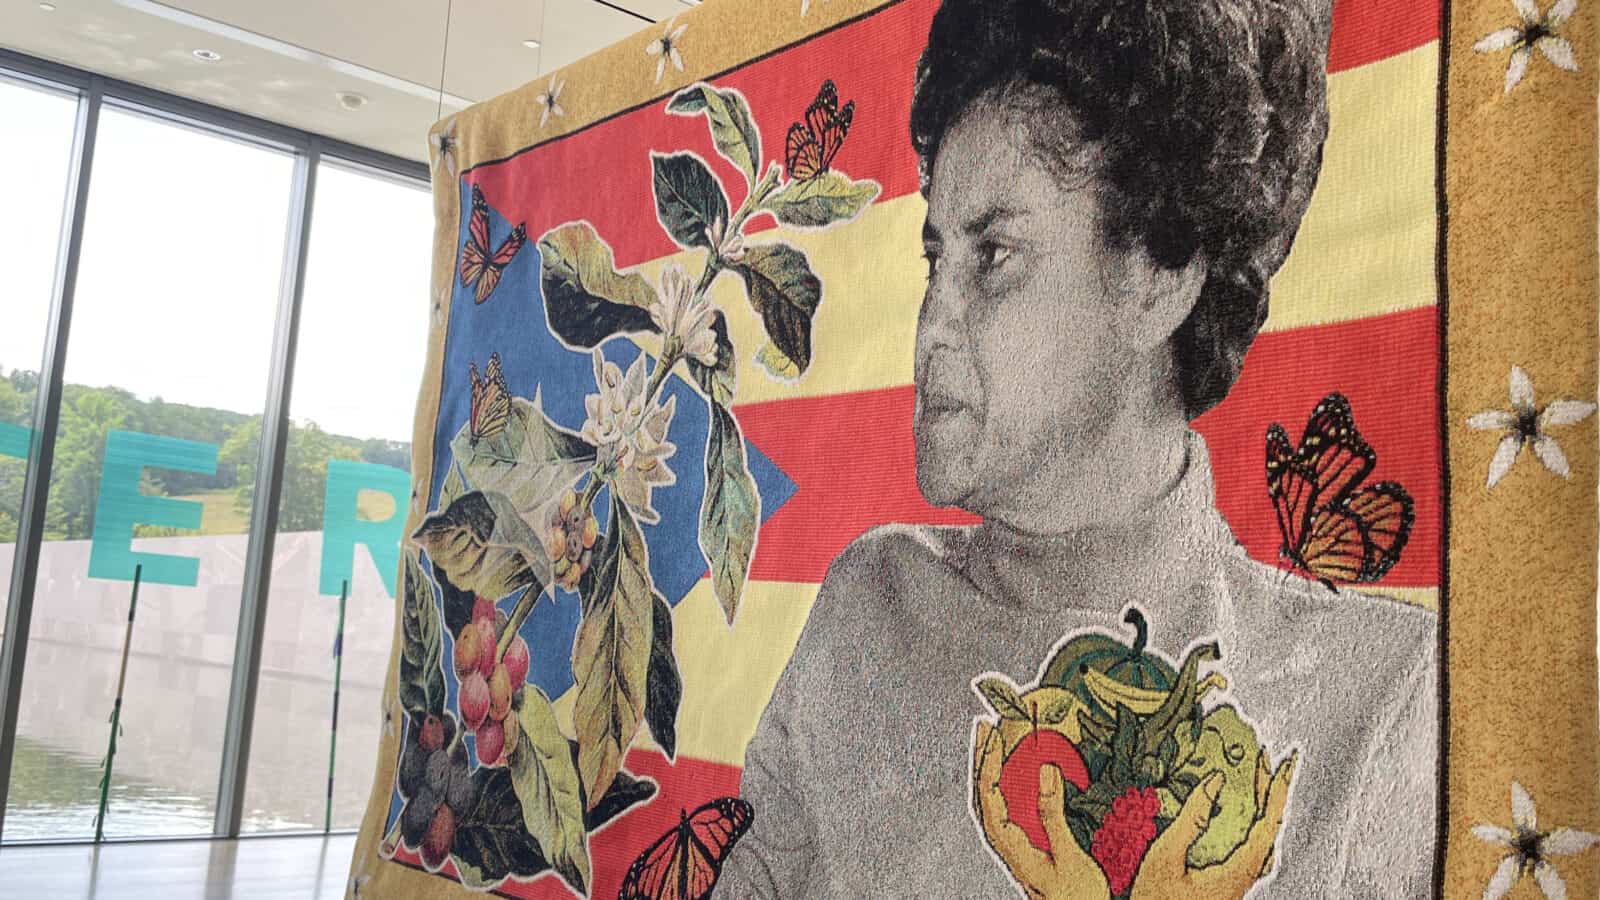 Faustina “Tinti” Deyá Díaz (1940–2021), an environmental activist in Puerto Rico, stands among blooming coffee flowers in Carolina Cayedo's 'We save our seeds for the following season' at the Clark Art Institute.